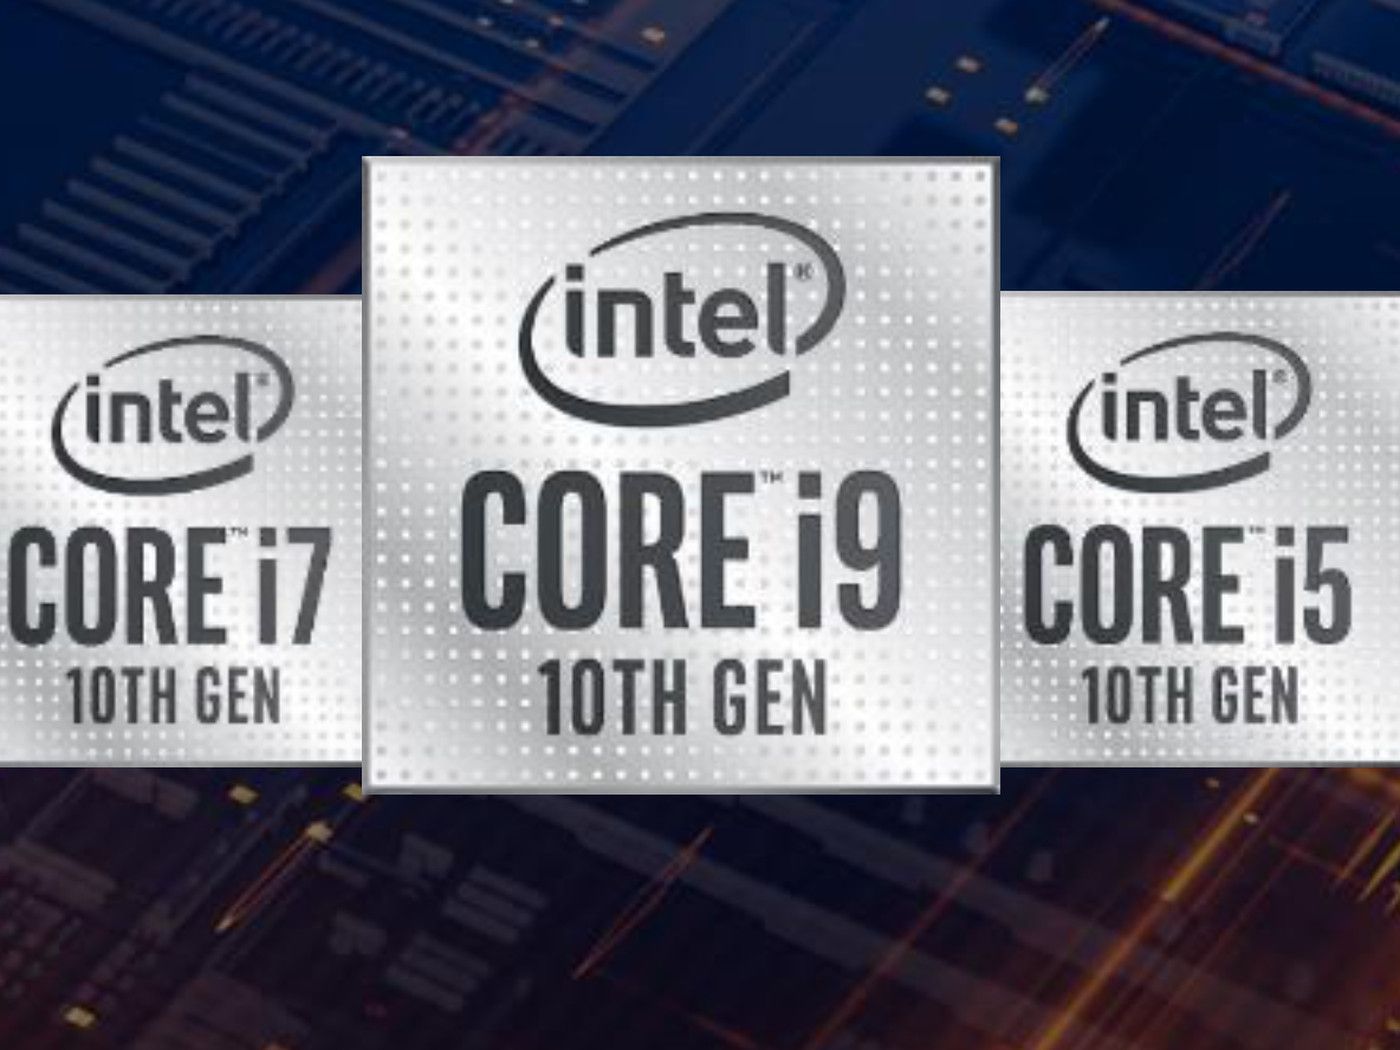 Intel's new 10th Gen chips bring 5.0GHz clock speeds to gaming laptops